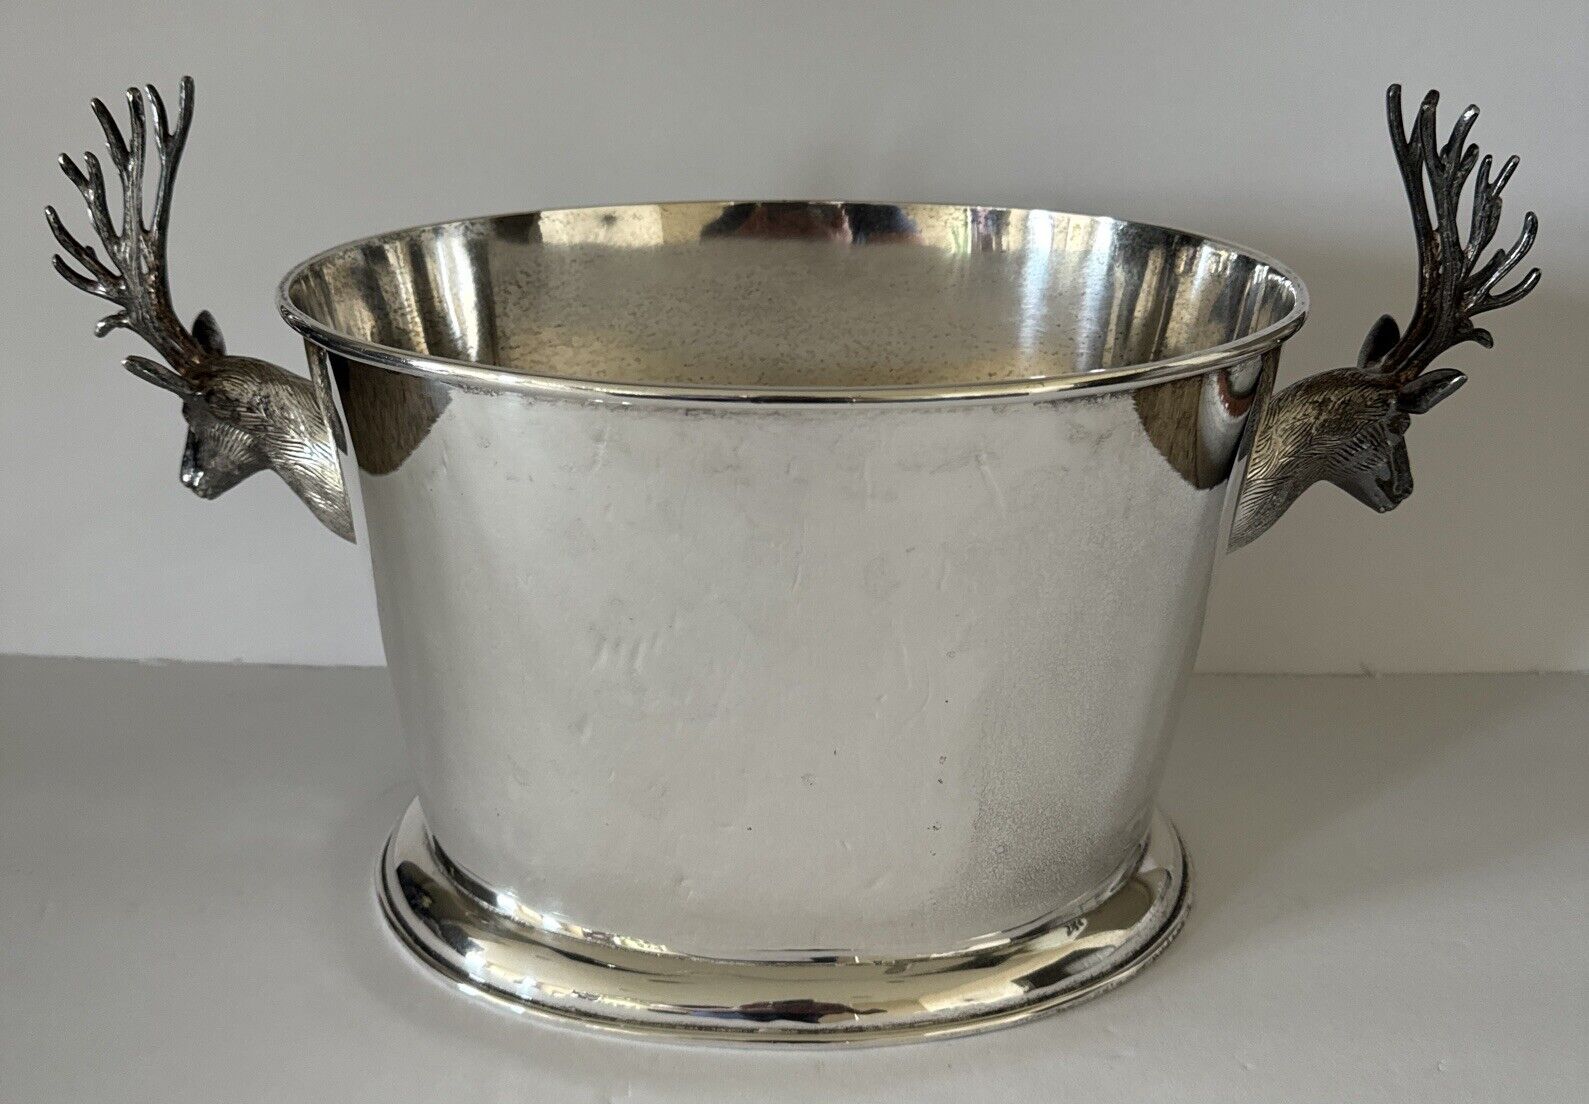 Pottery Barn SILVER STAG ICE BUCKET ANTLER Large Party Silverplate Copper Rare